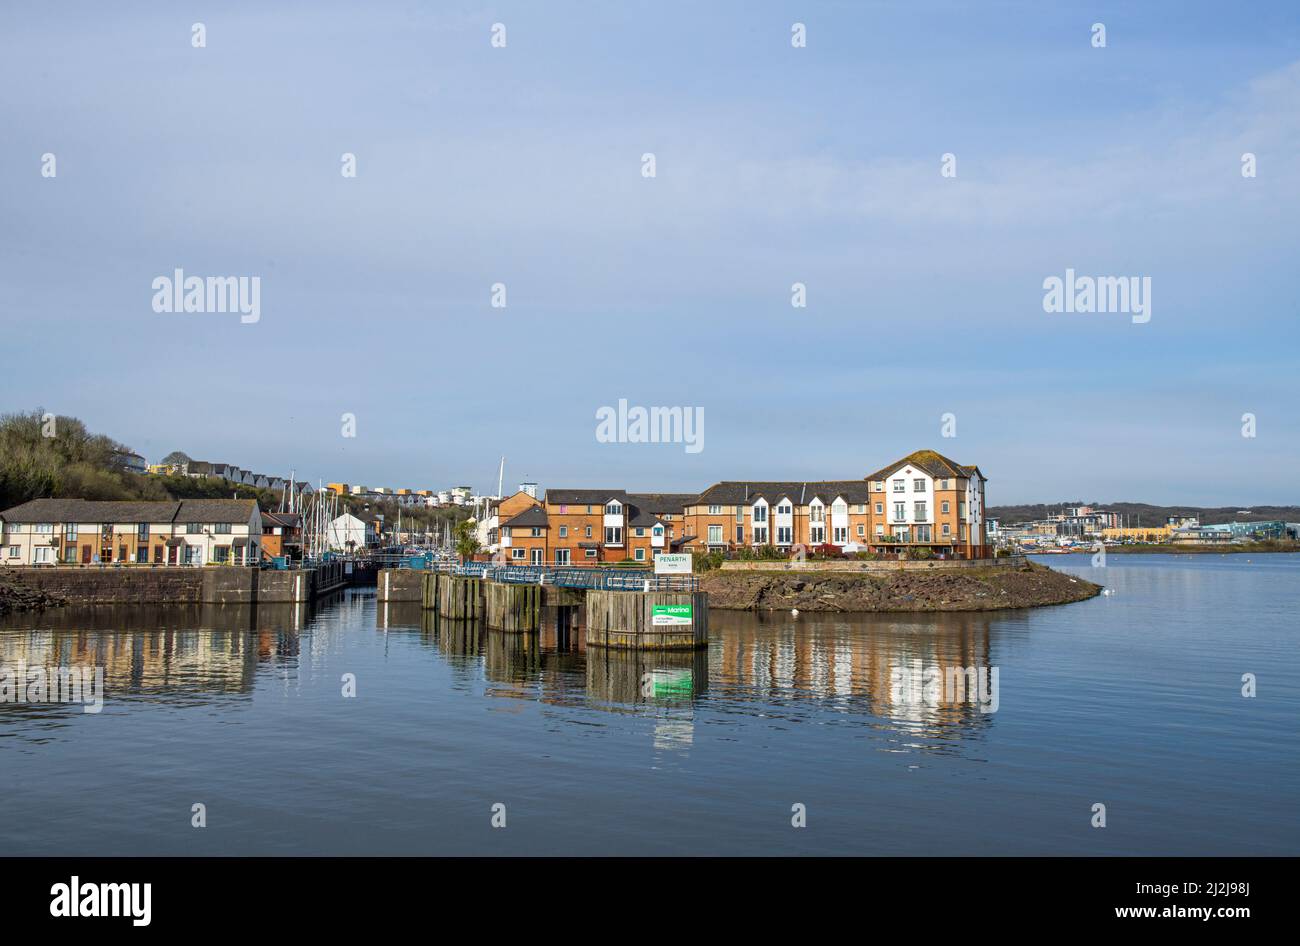 Penarth (old harbour) Marina leading into Cardiff Bay with properties reflected in the still water on a sunny April day Stock Photo